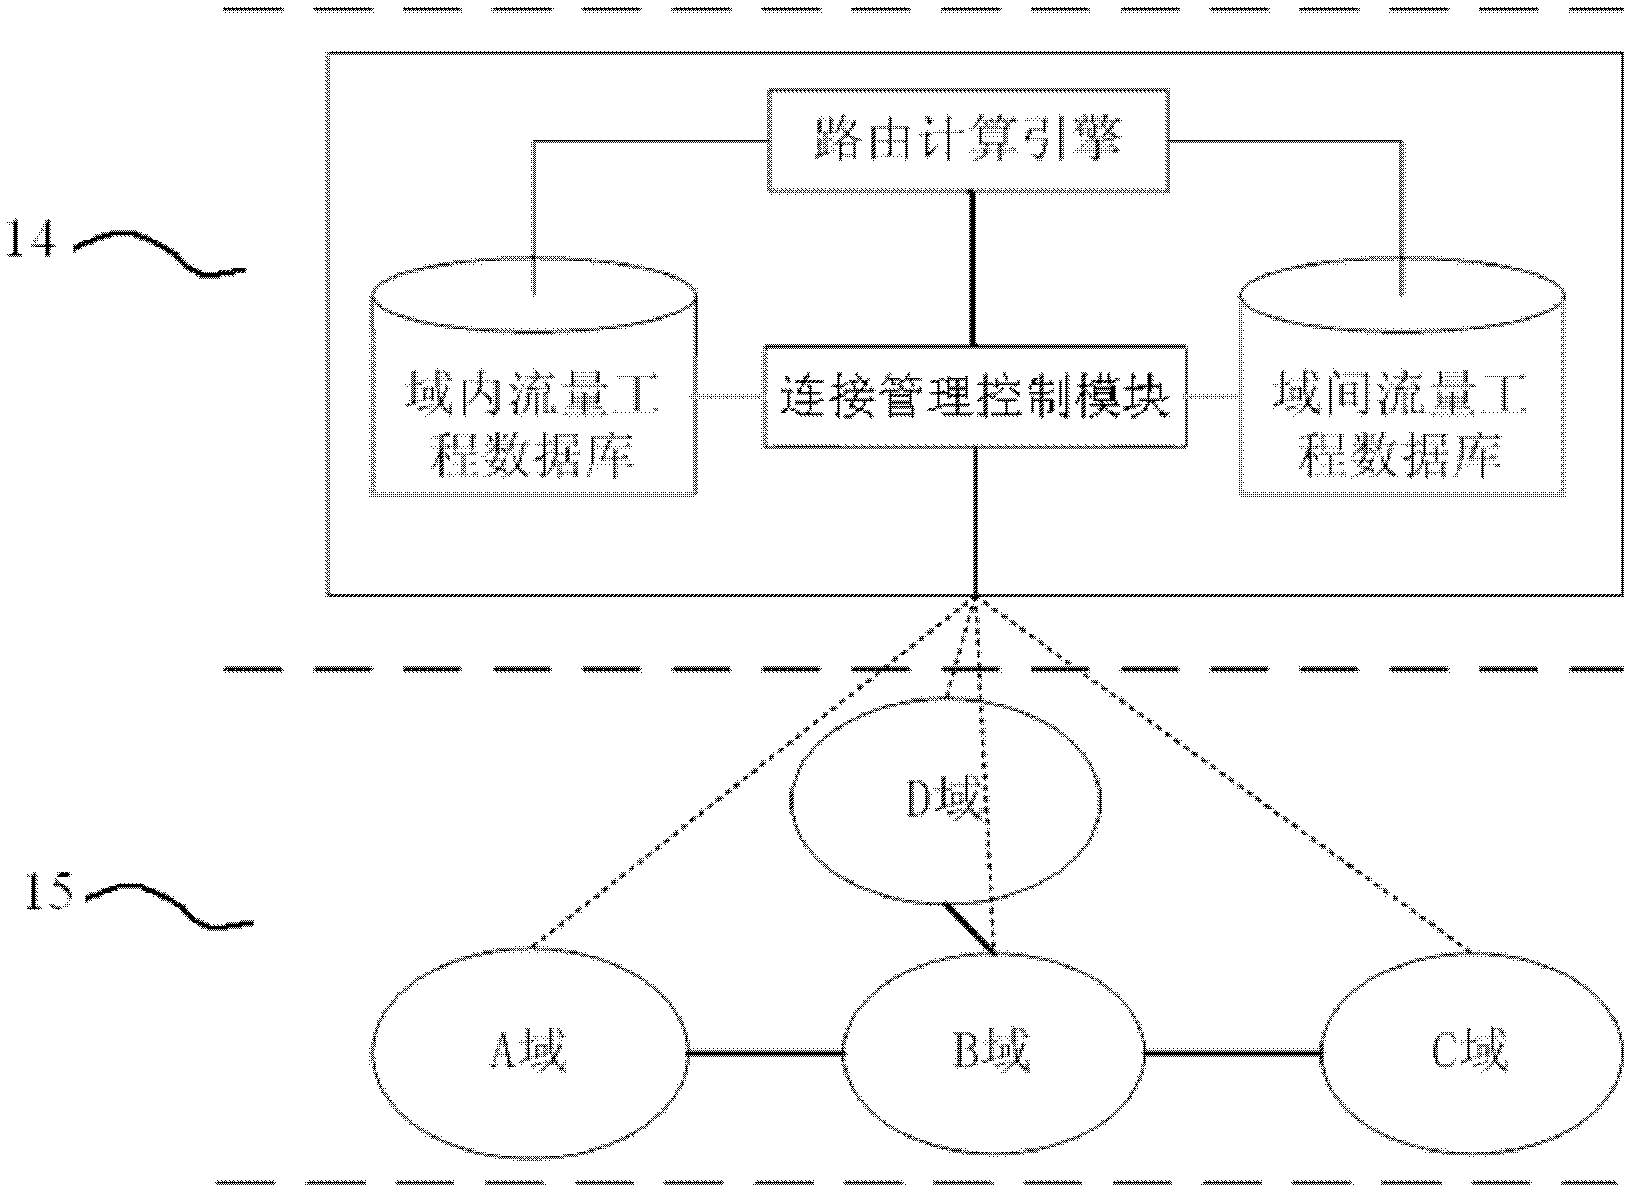 Method and device for binding and mapping control of inter-domain links and intra-domain channels for cross-domain services